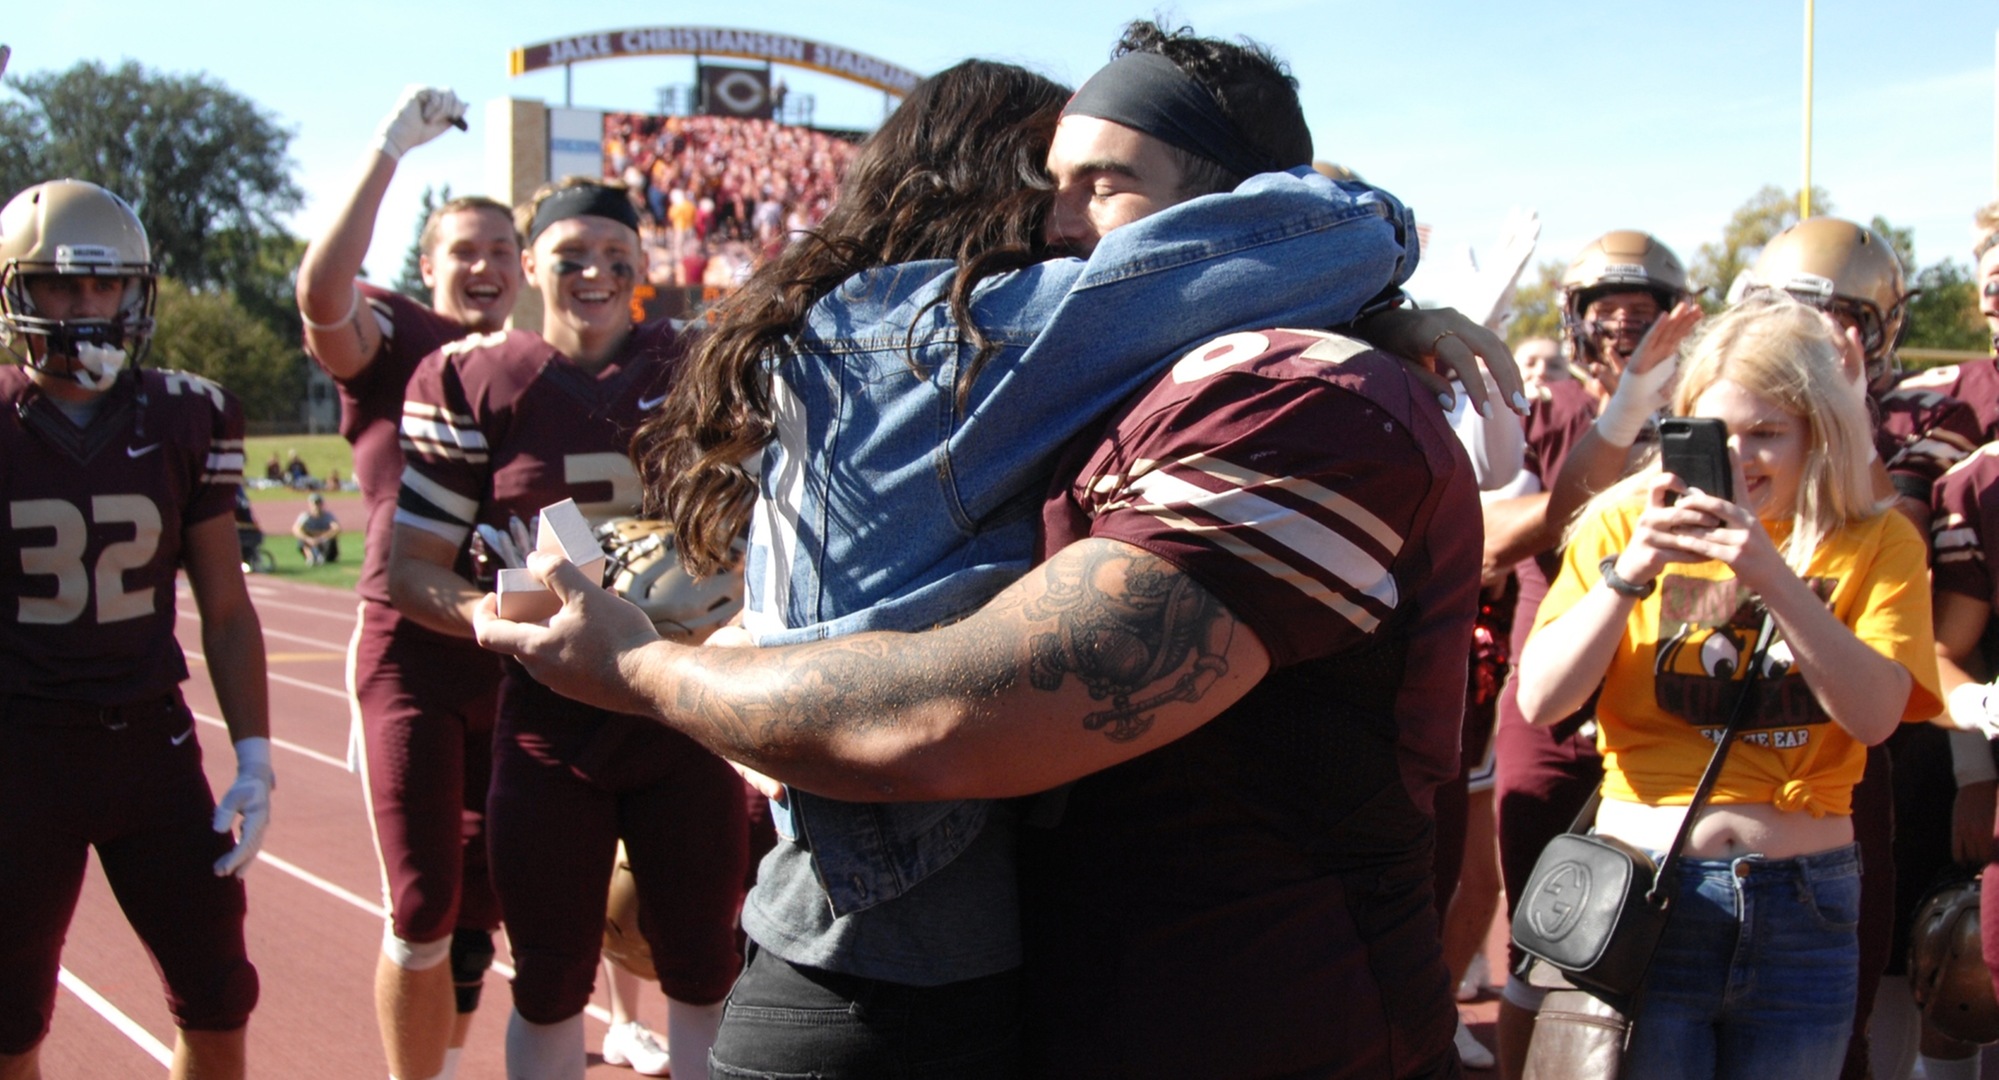 Senior Gunnar Kollman and fiance Addy Johnson hug after Kollman proposed to her after the Cobbers' win over Hamline.